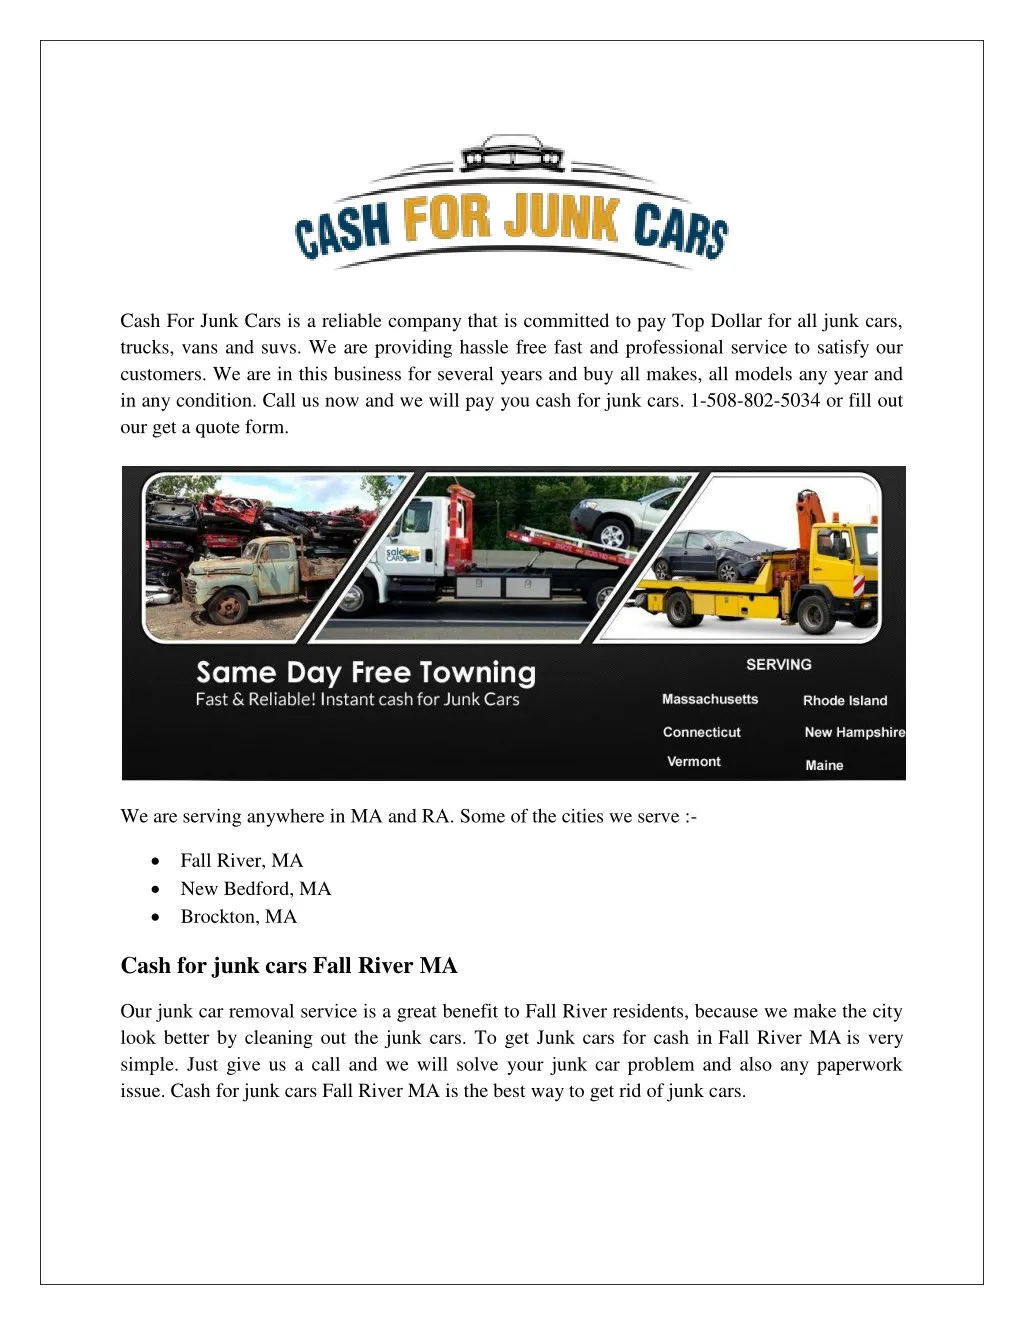 cash for junk cars is a reliable company that